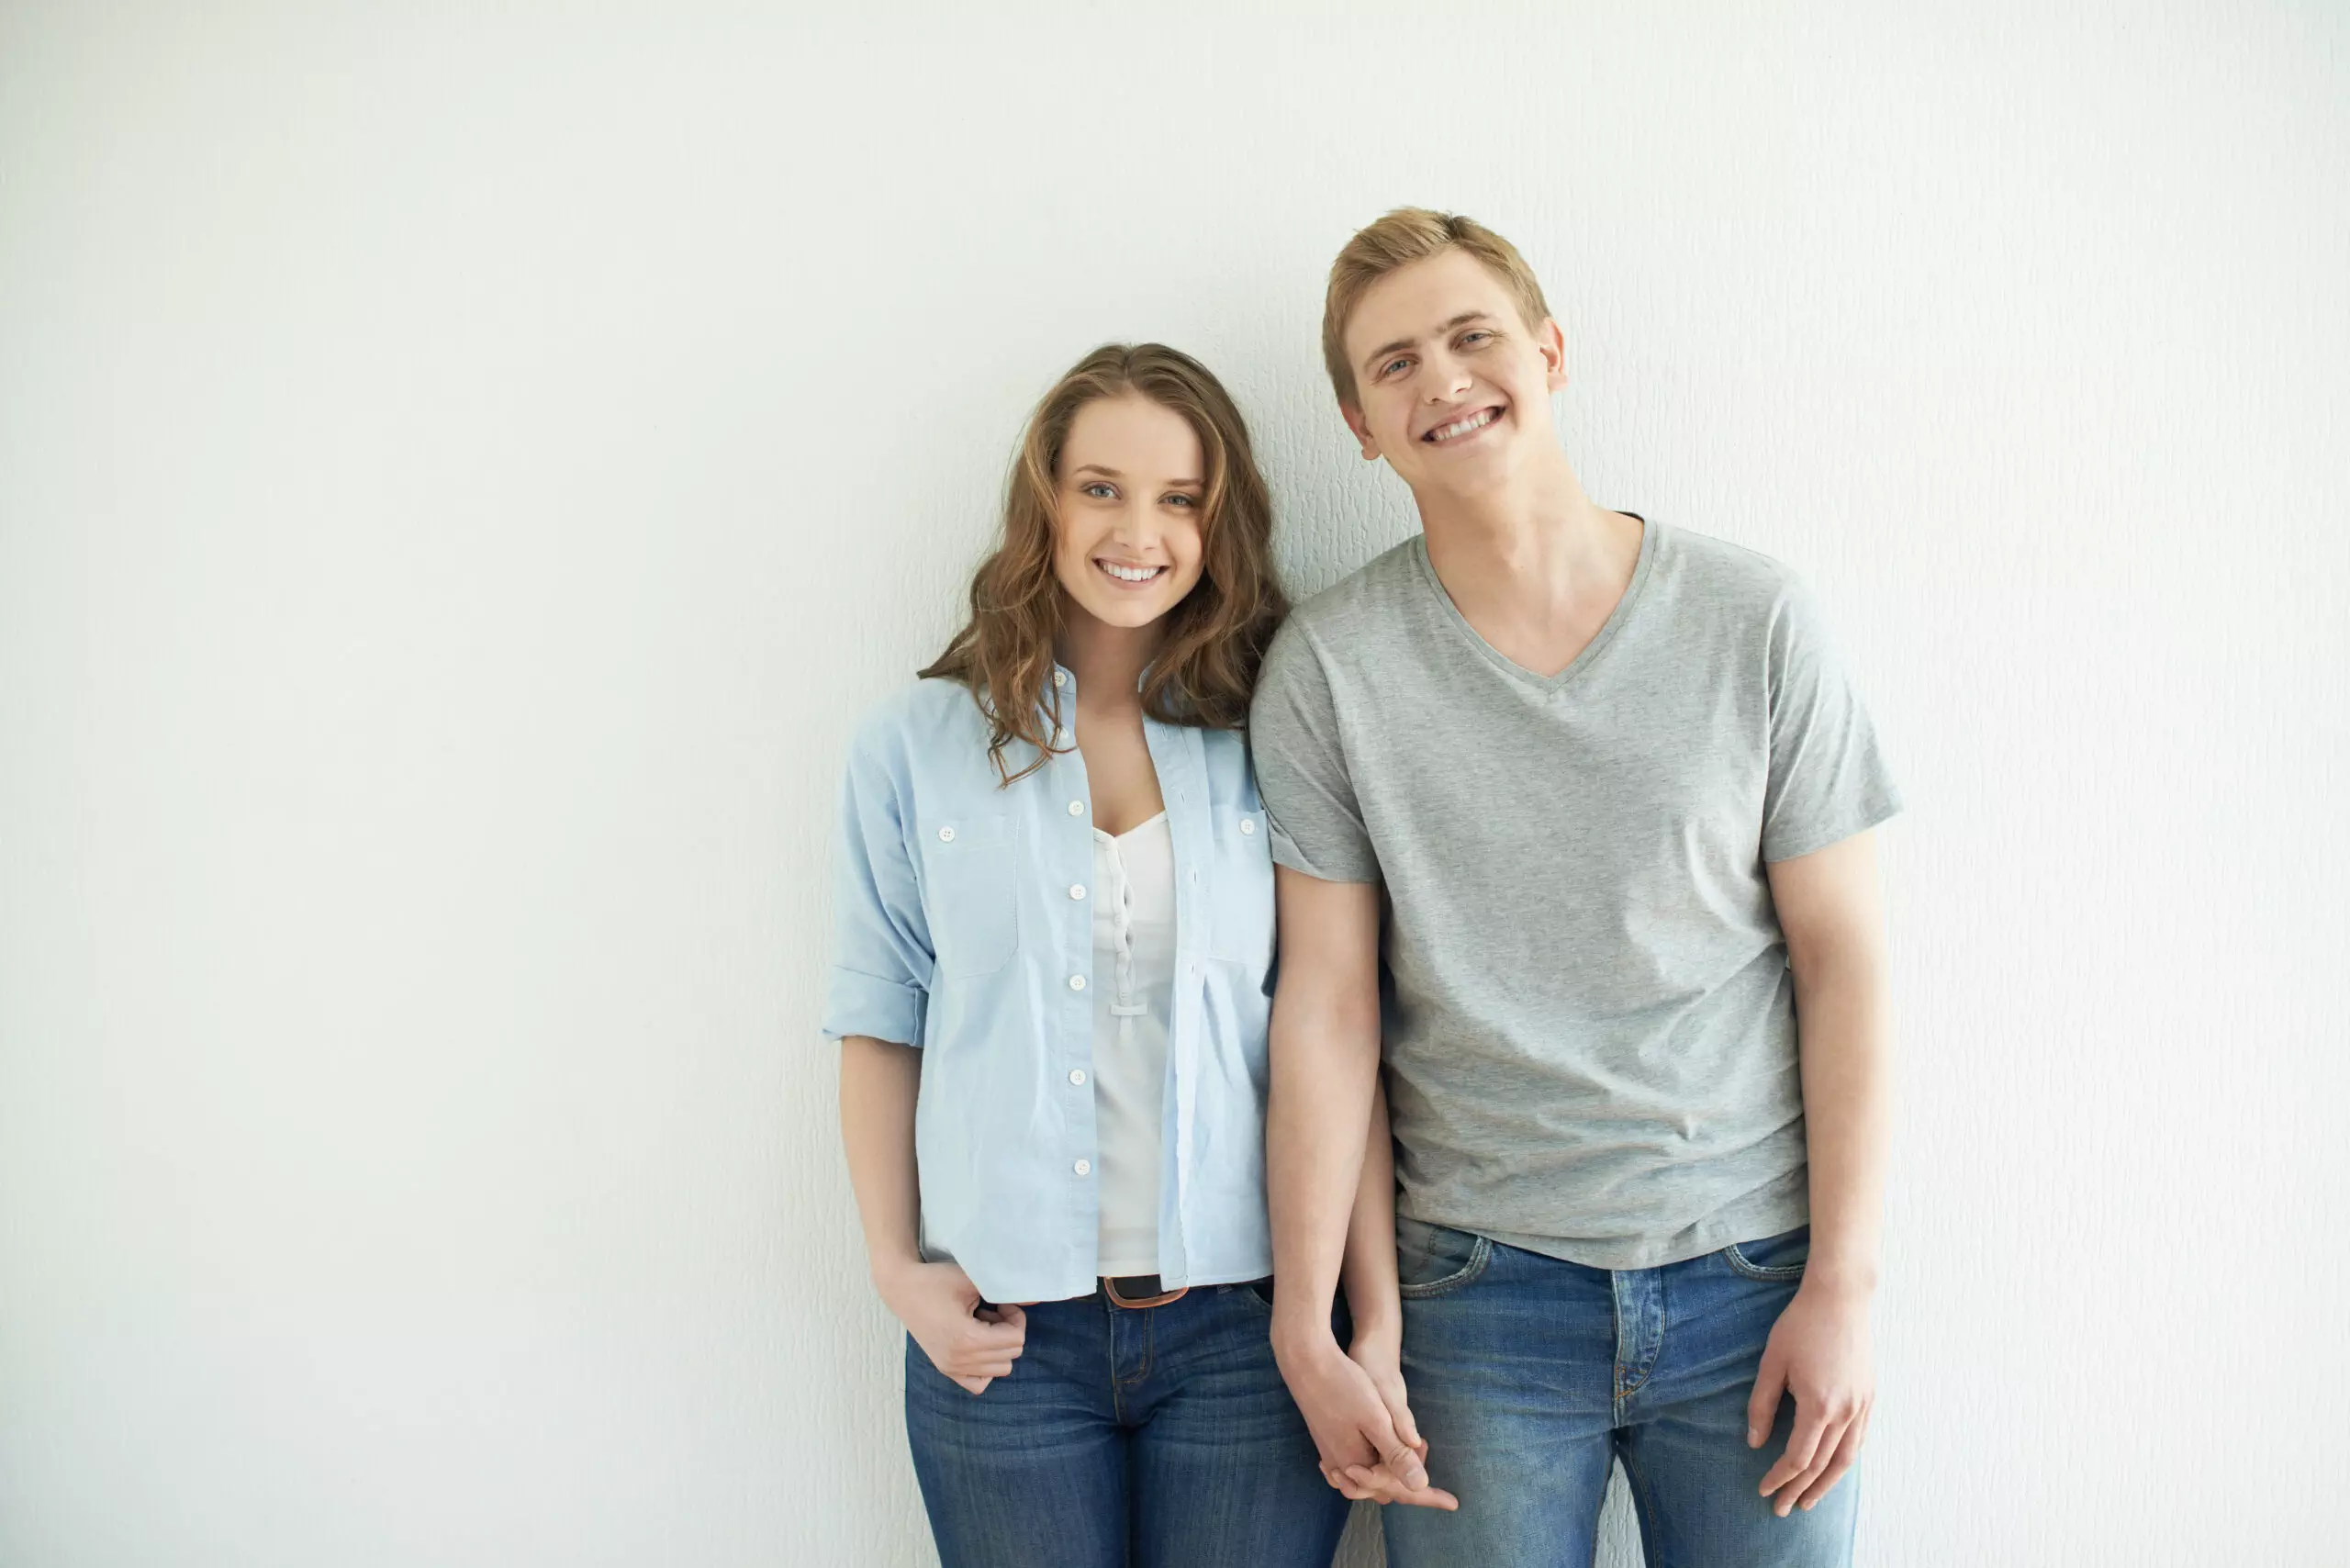 Young couple smiling against white background.